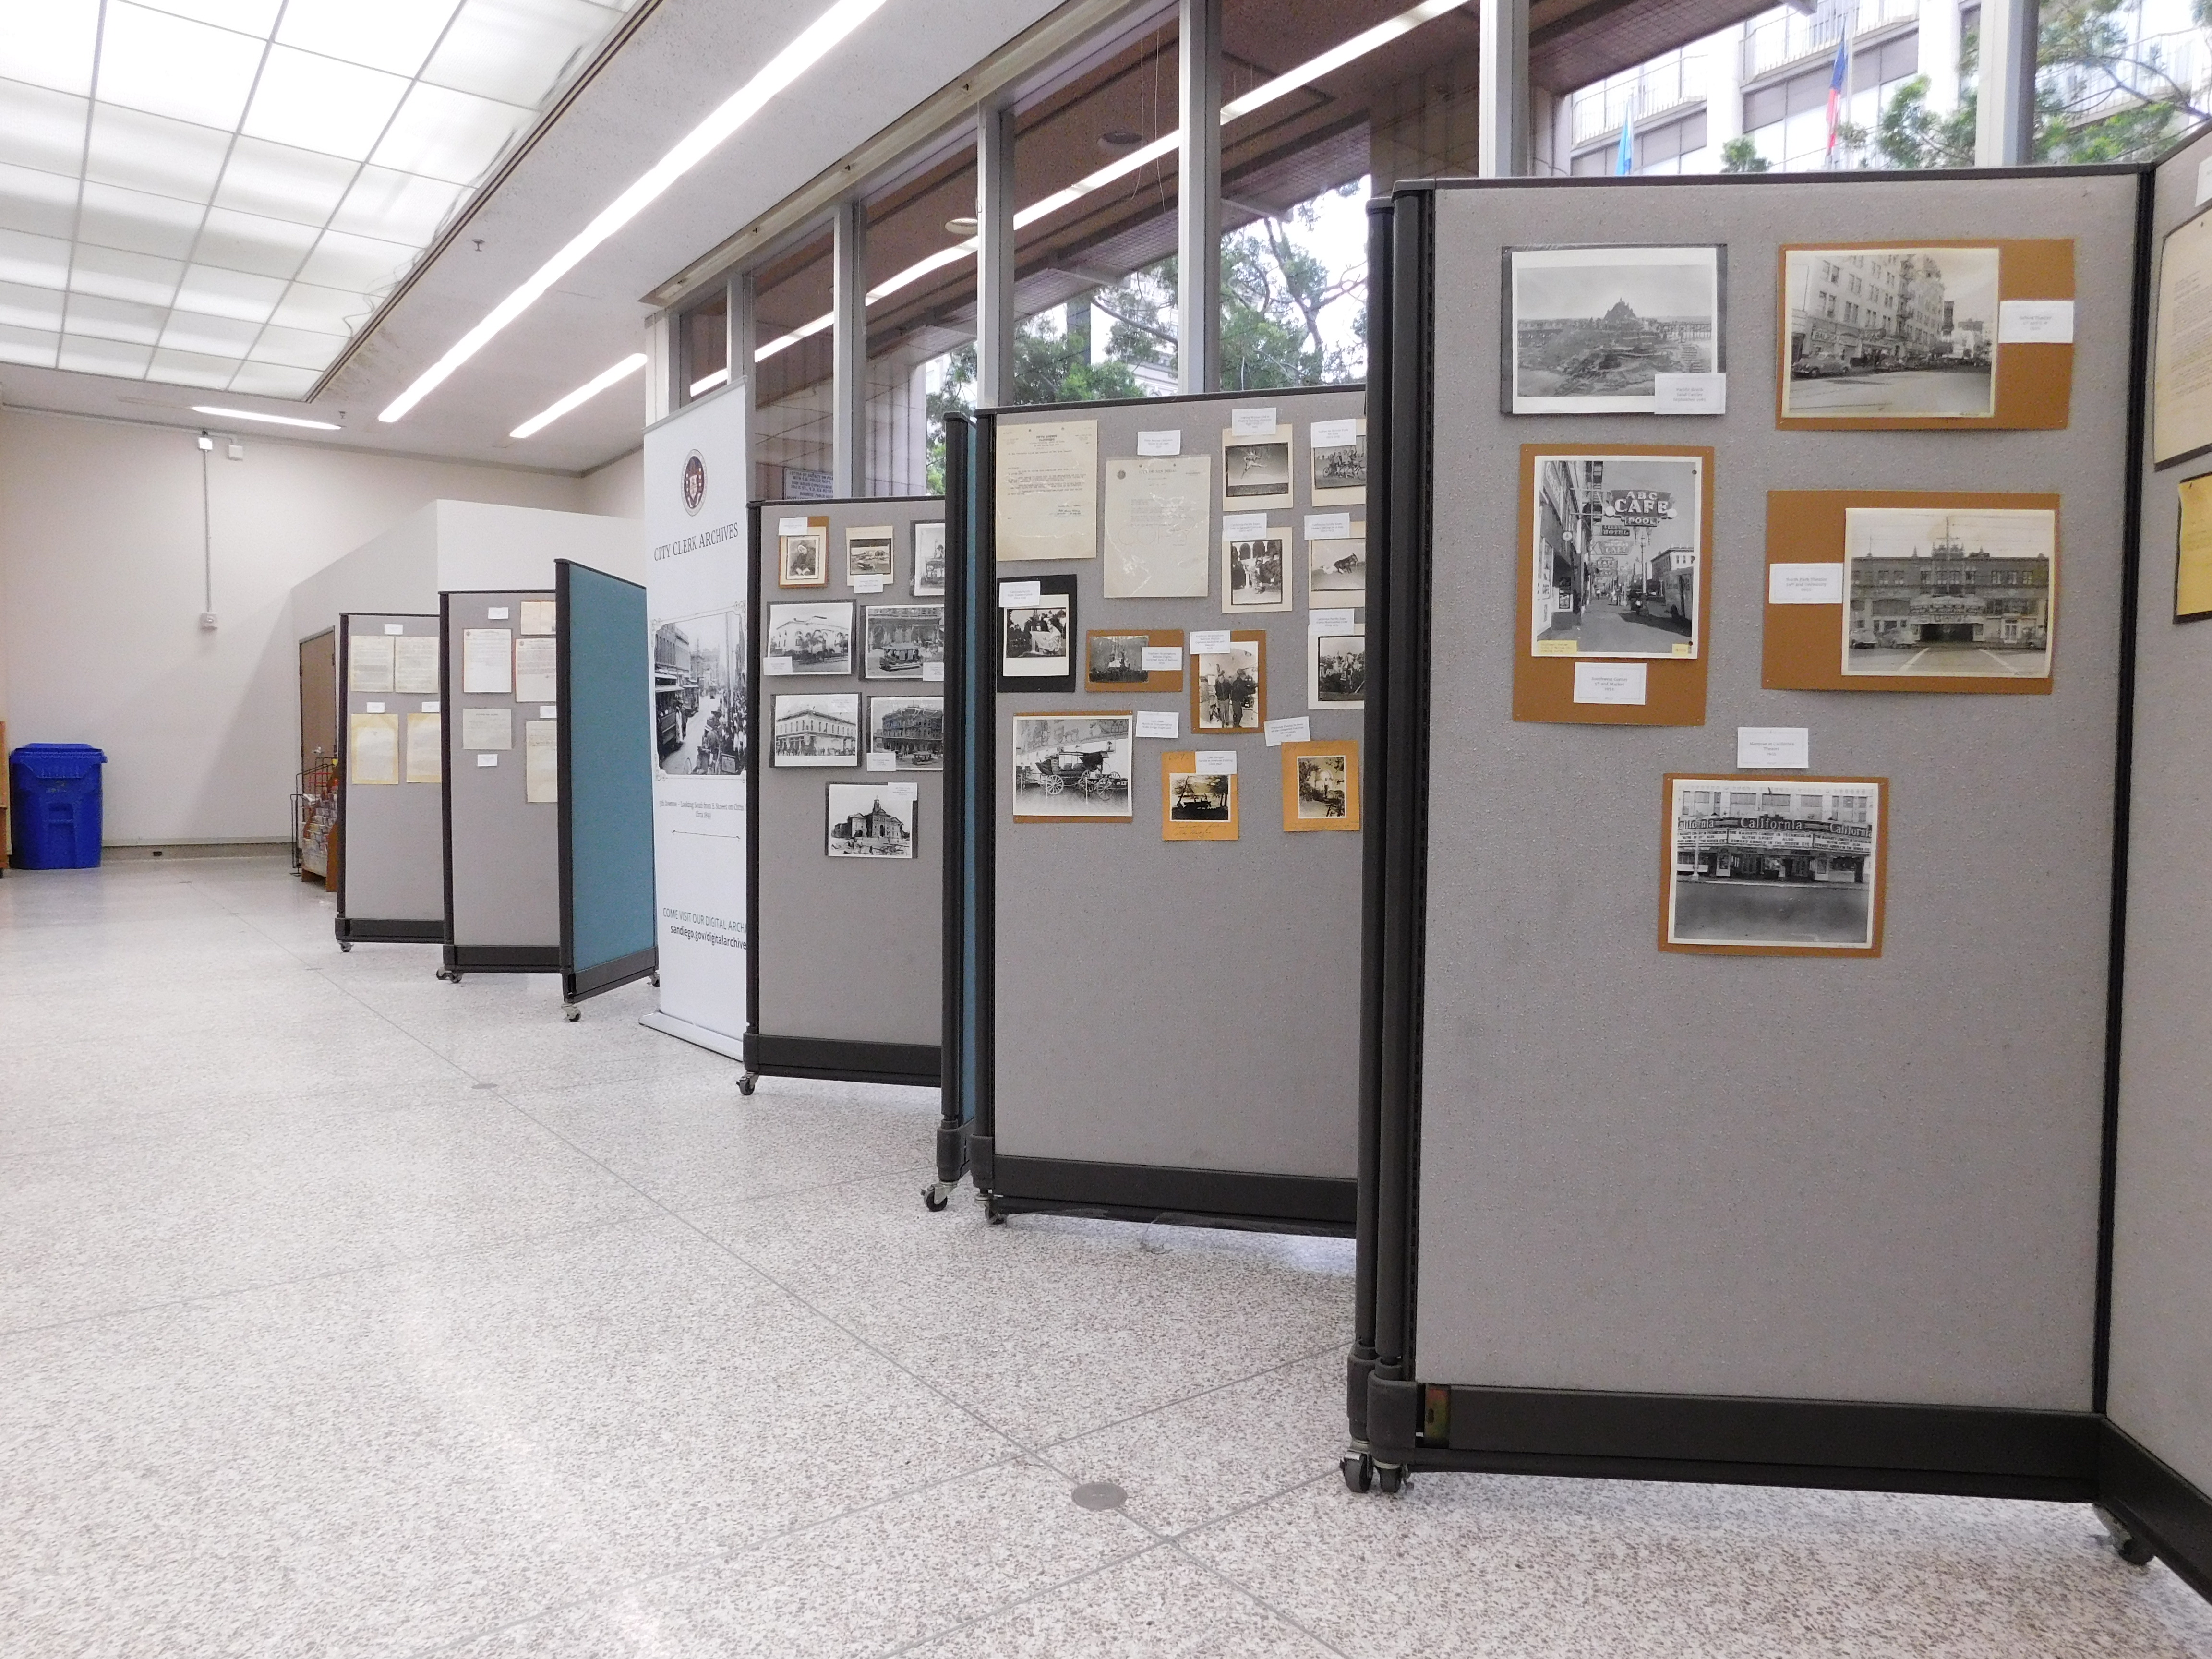 Display information on historical events in San Diego